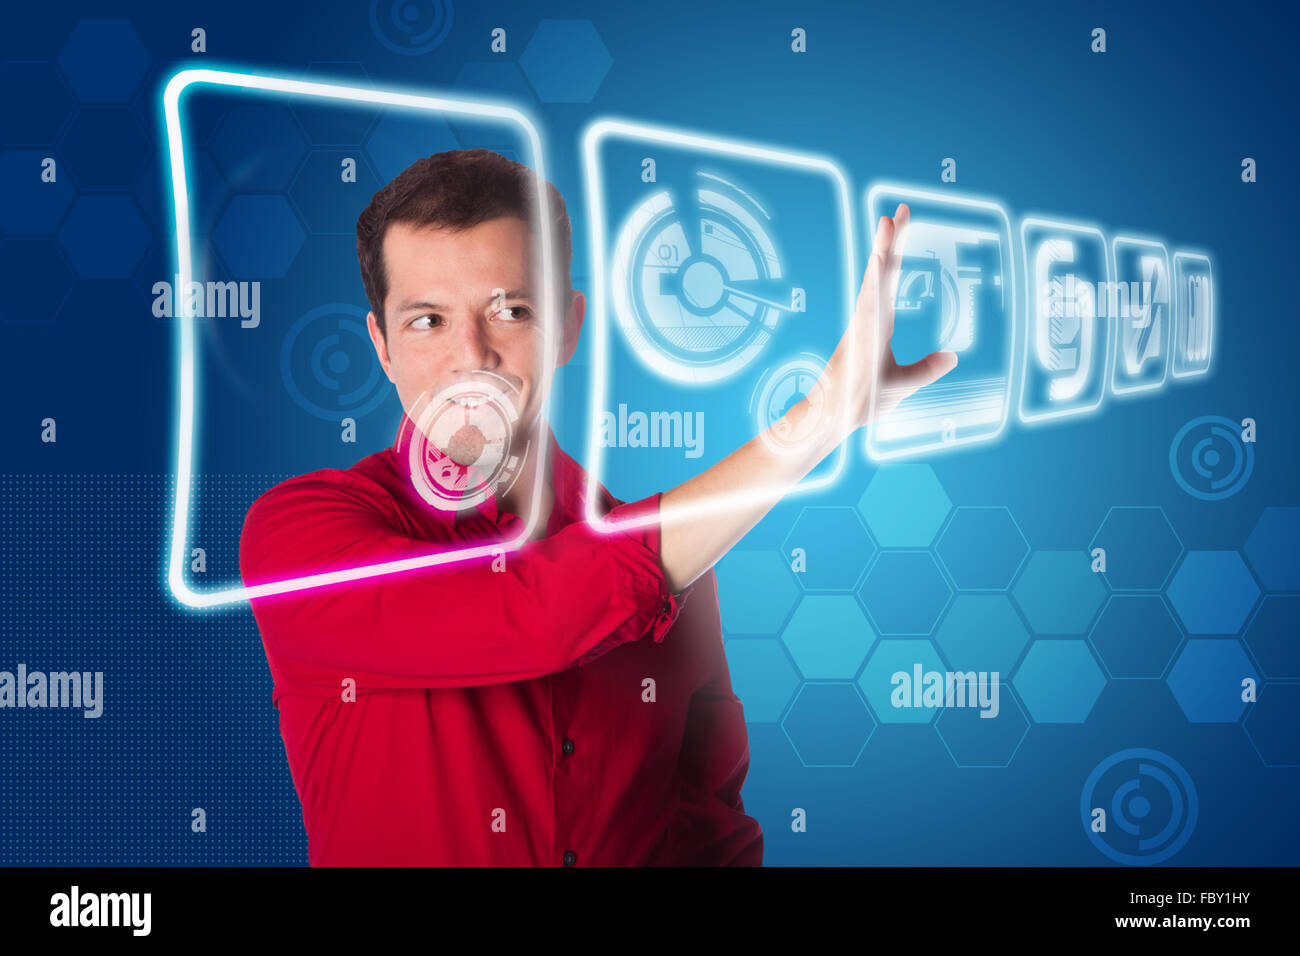 Future business interface solution Stock Photo